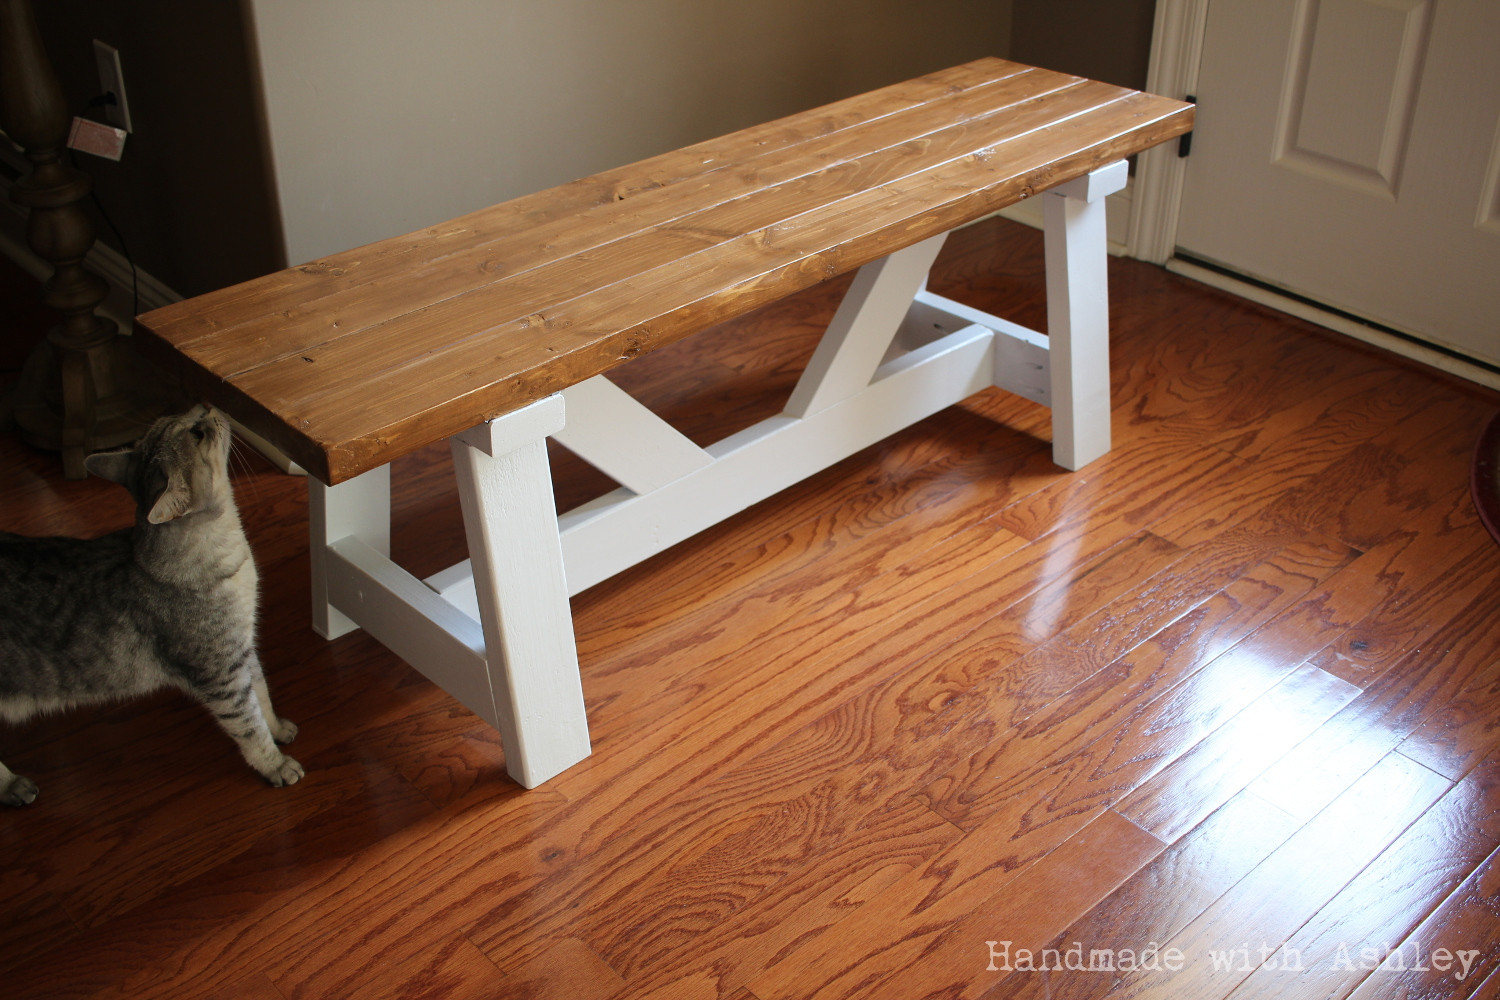 Best ideas about Ana White DIY
. Save or Pin DIY Providence Bench Plans by Ana White Handmade with Now.